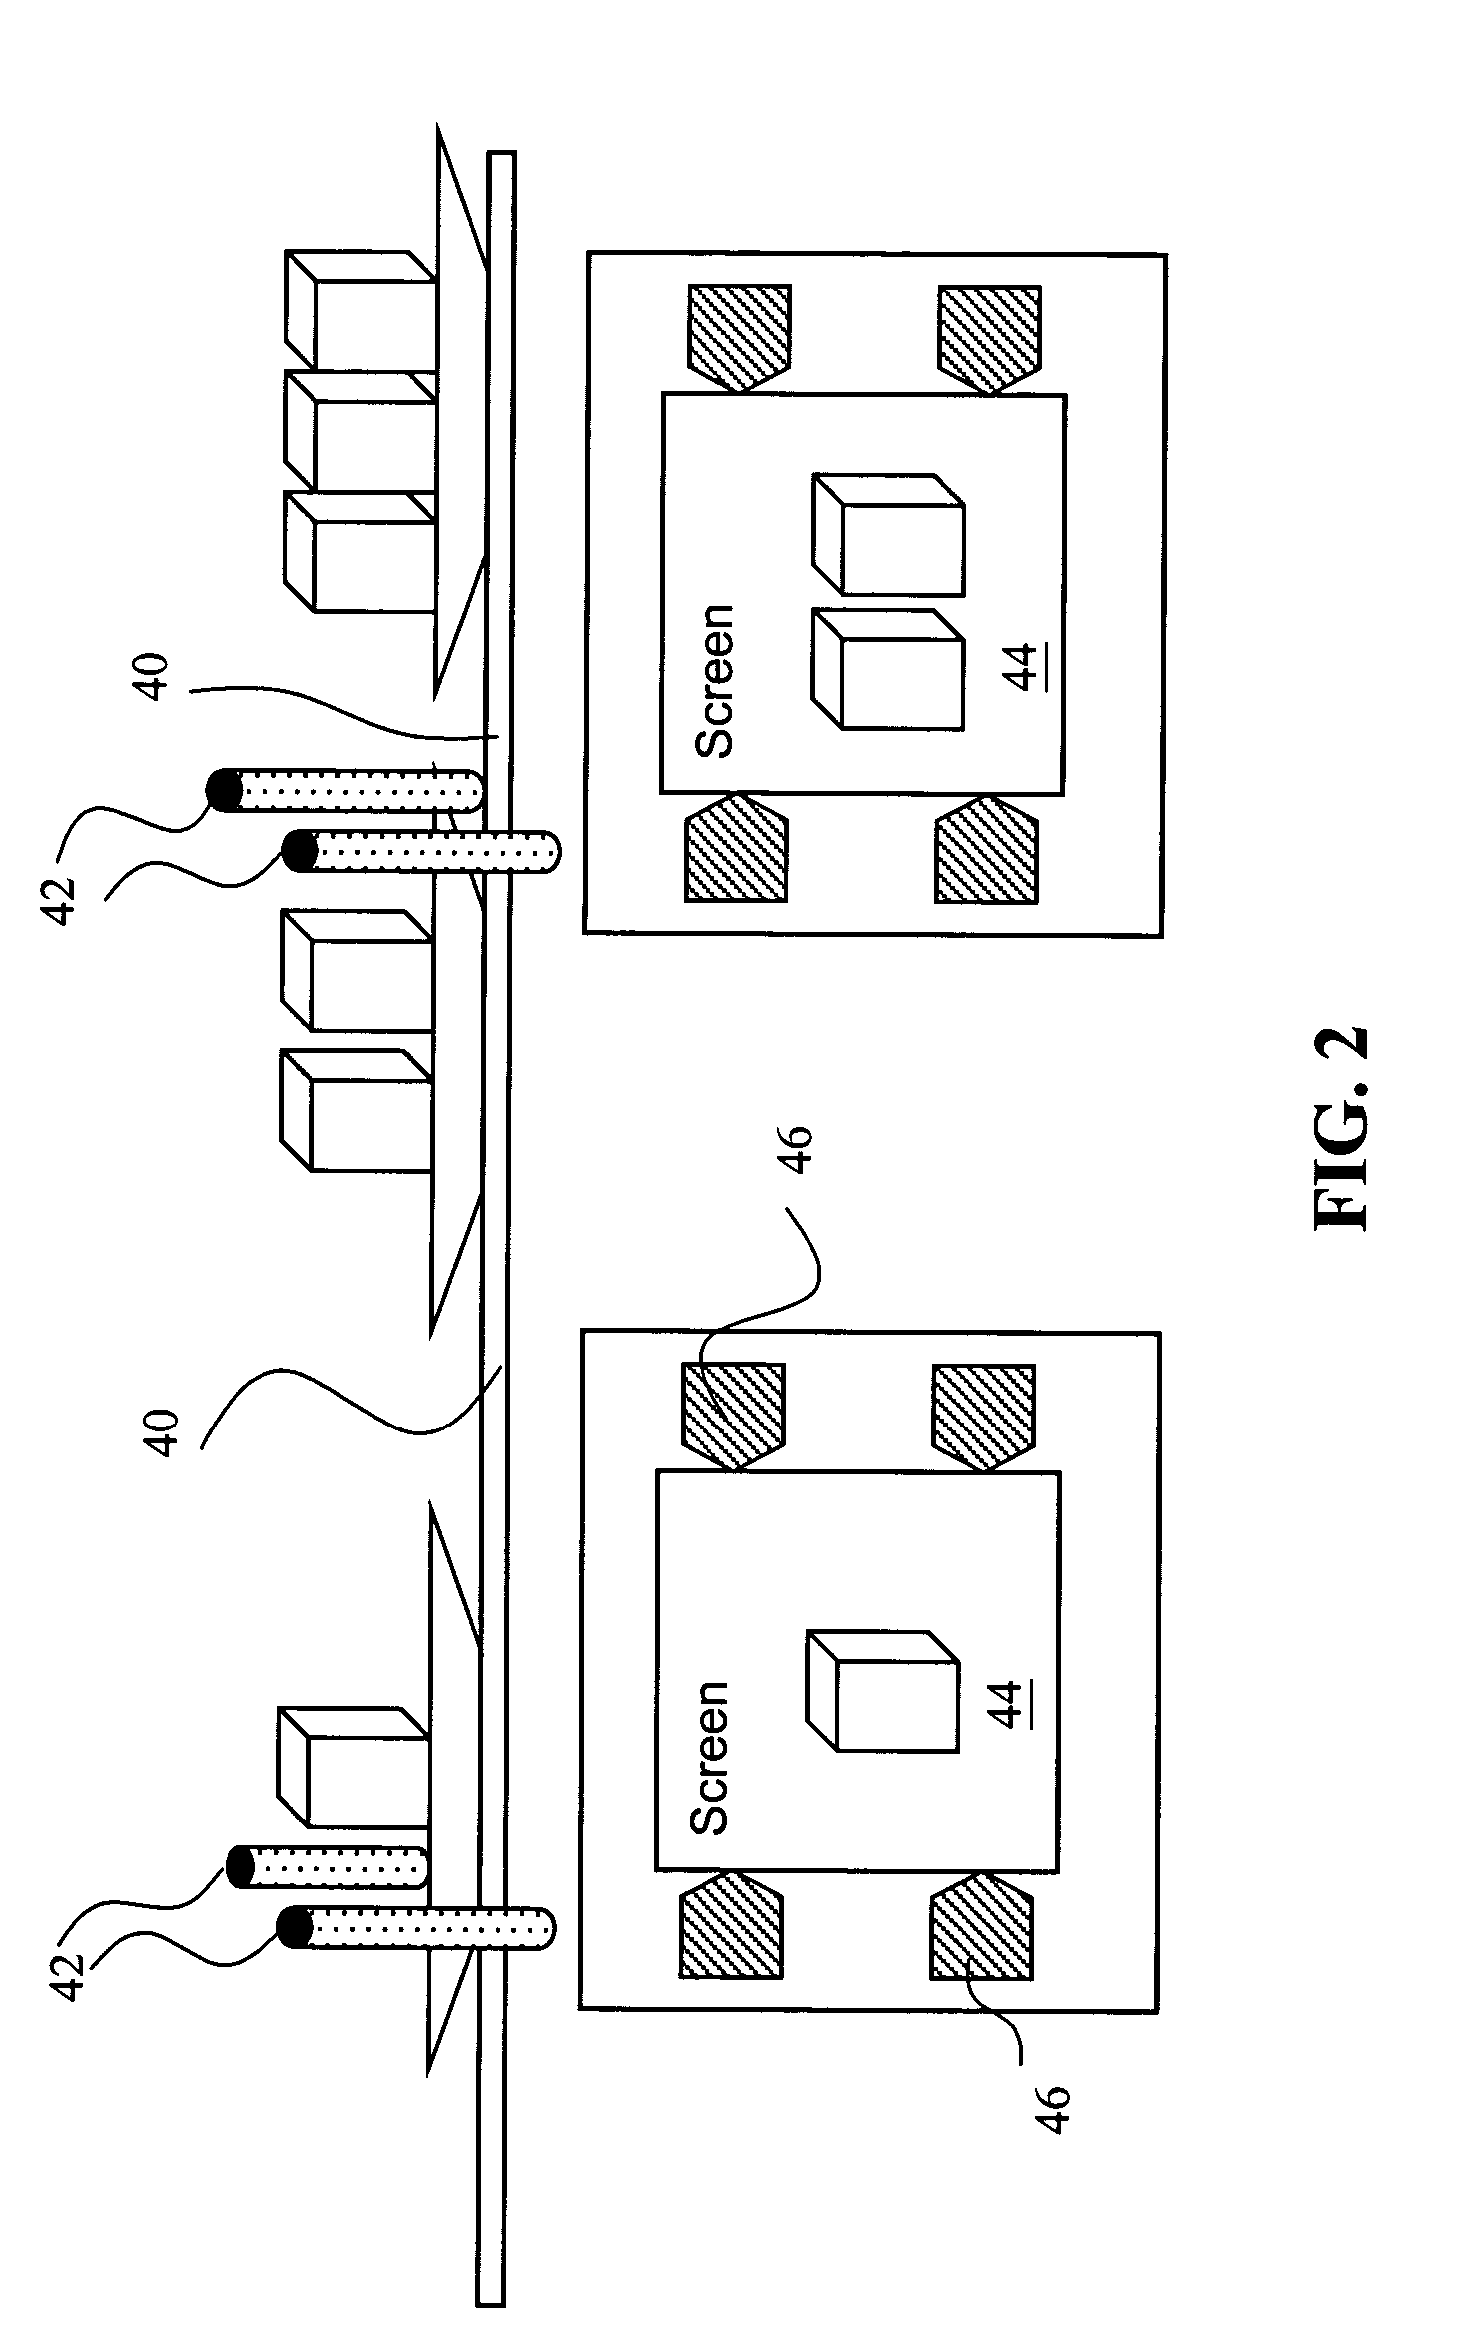 Apparatus, method and system for food management and food inventory